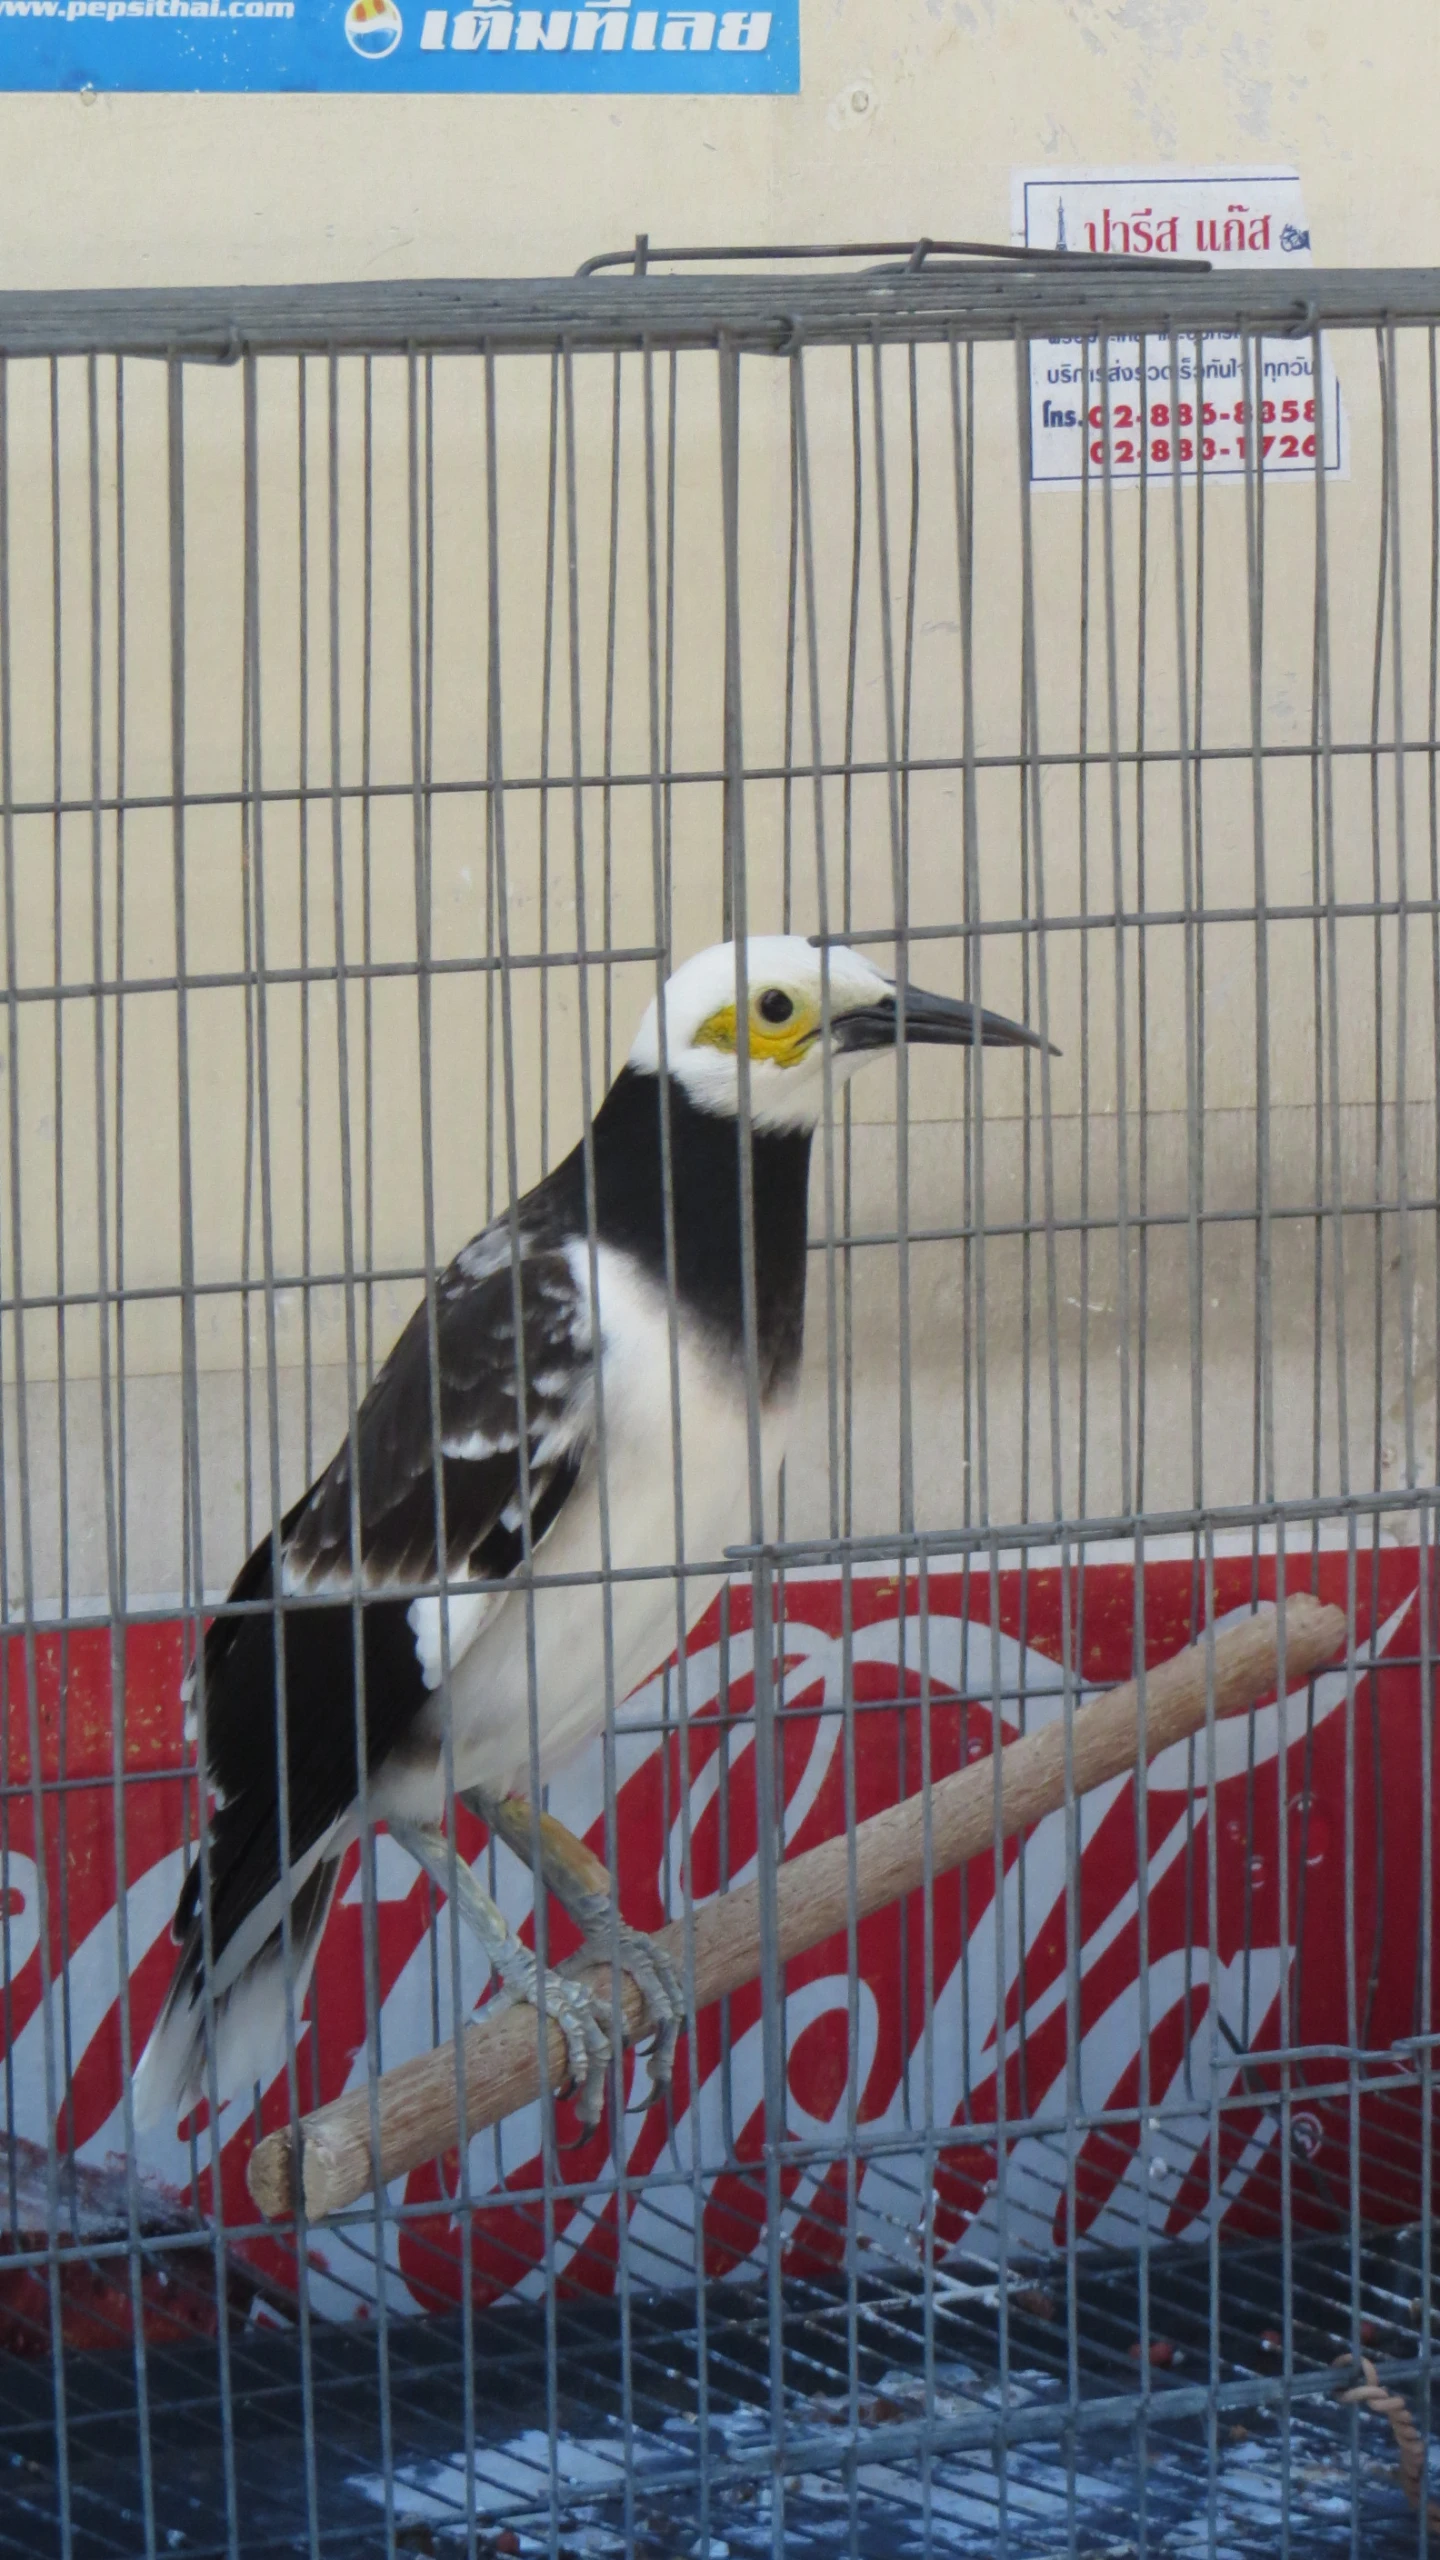 a bird is sitting on a stick in the cage